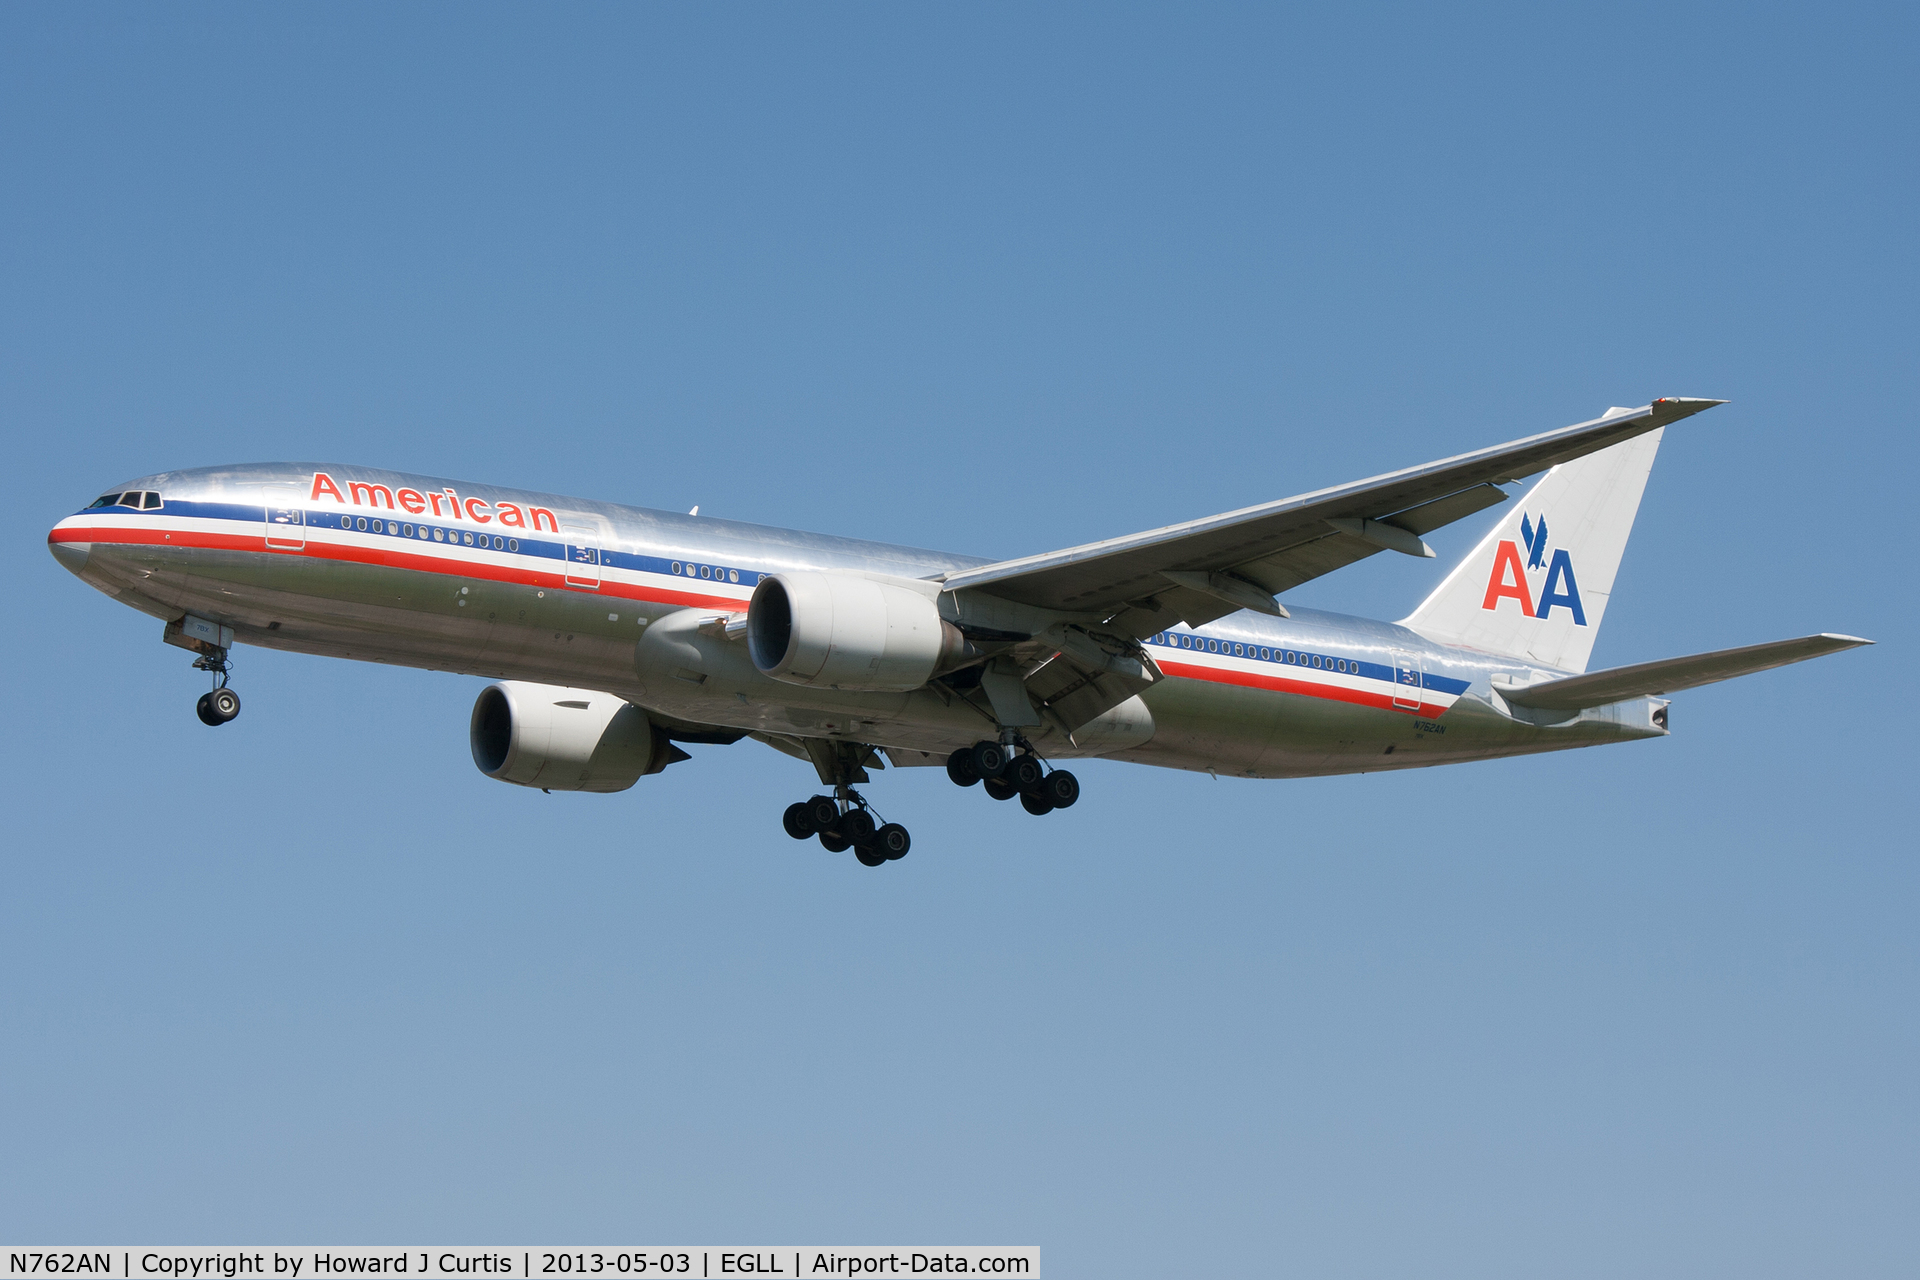 N762AN, 2002 Boeing 777-223 C/N 31479, American Airlines, on approach to runway 27L.